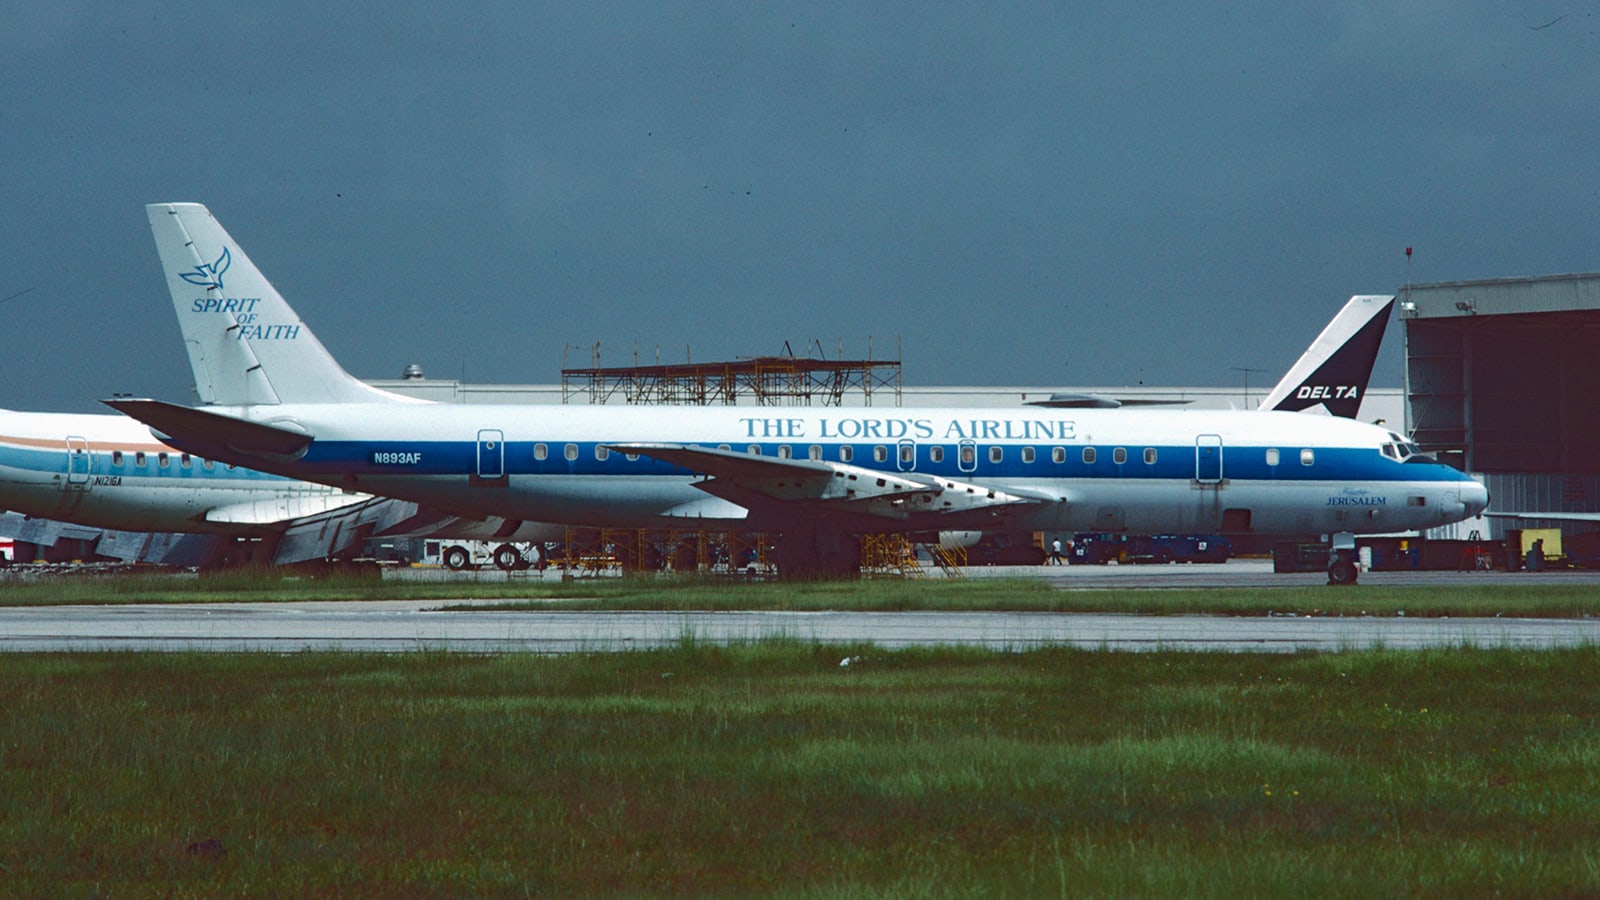 Here is a list of 5 weird airlines that have existed in the past